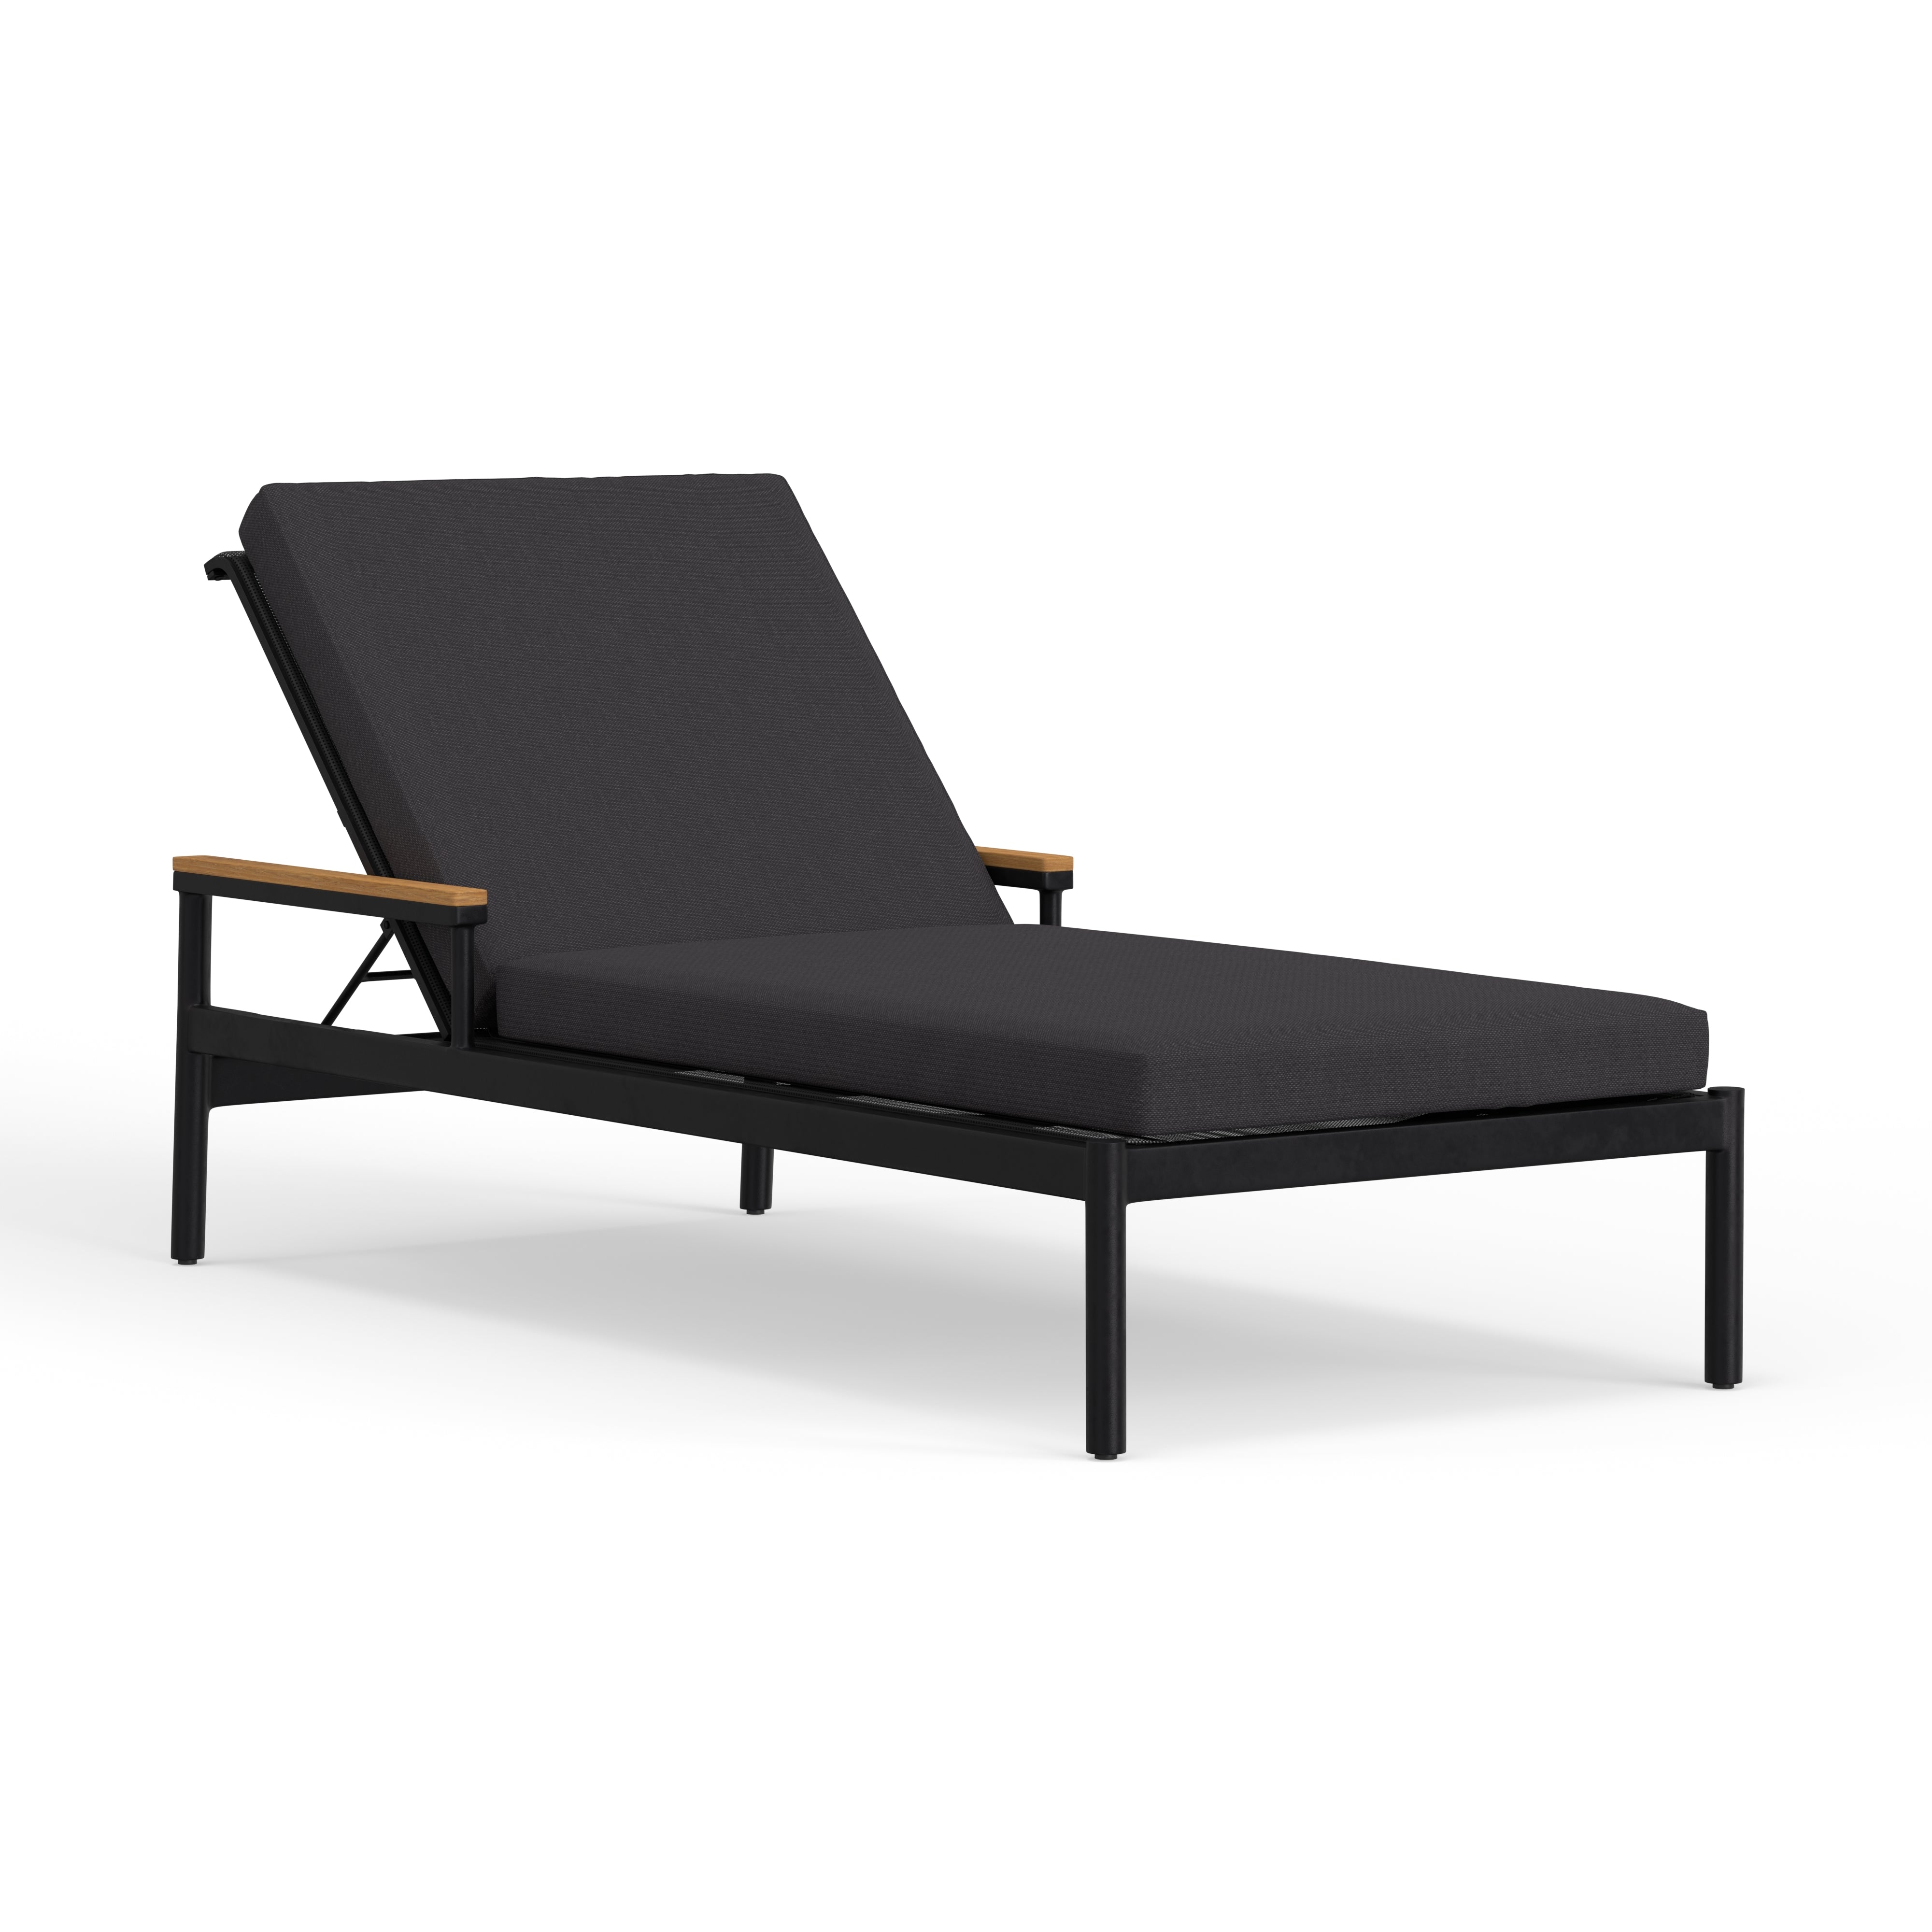 Most Comfortable Chaise Lounge For Pool